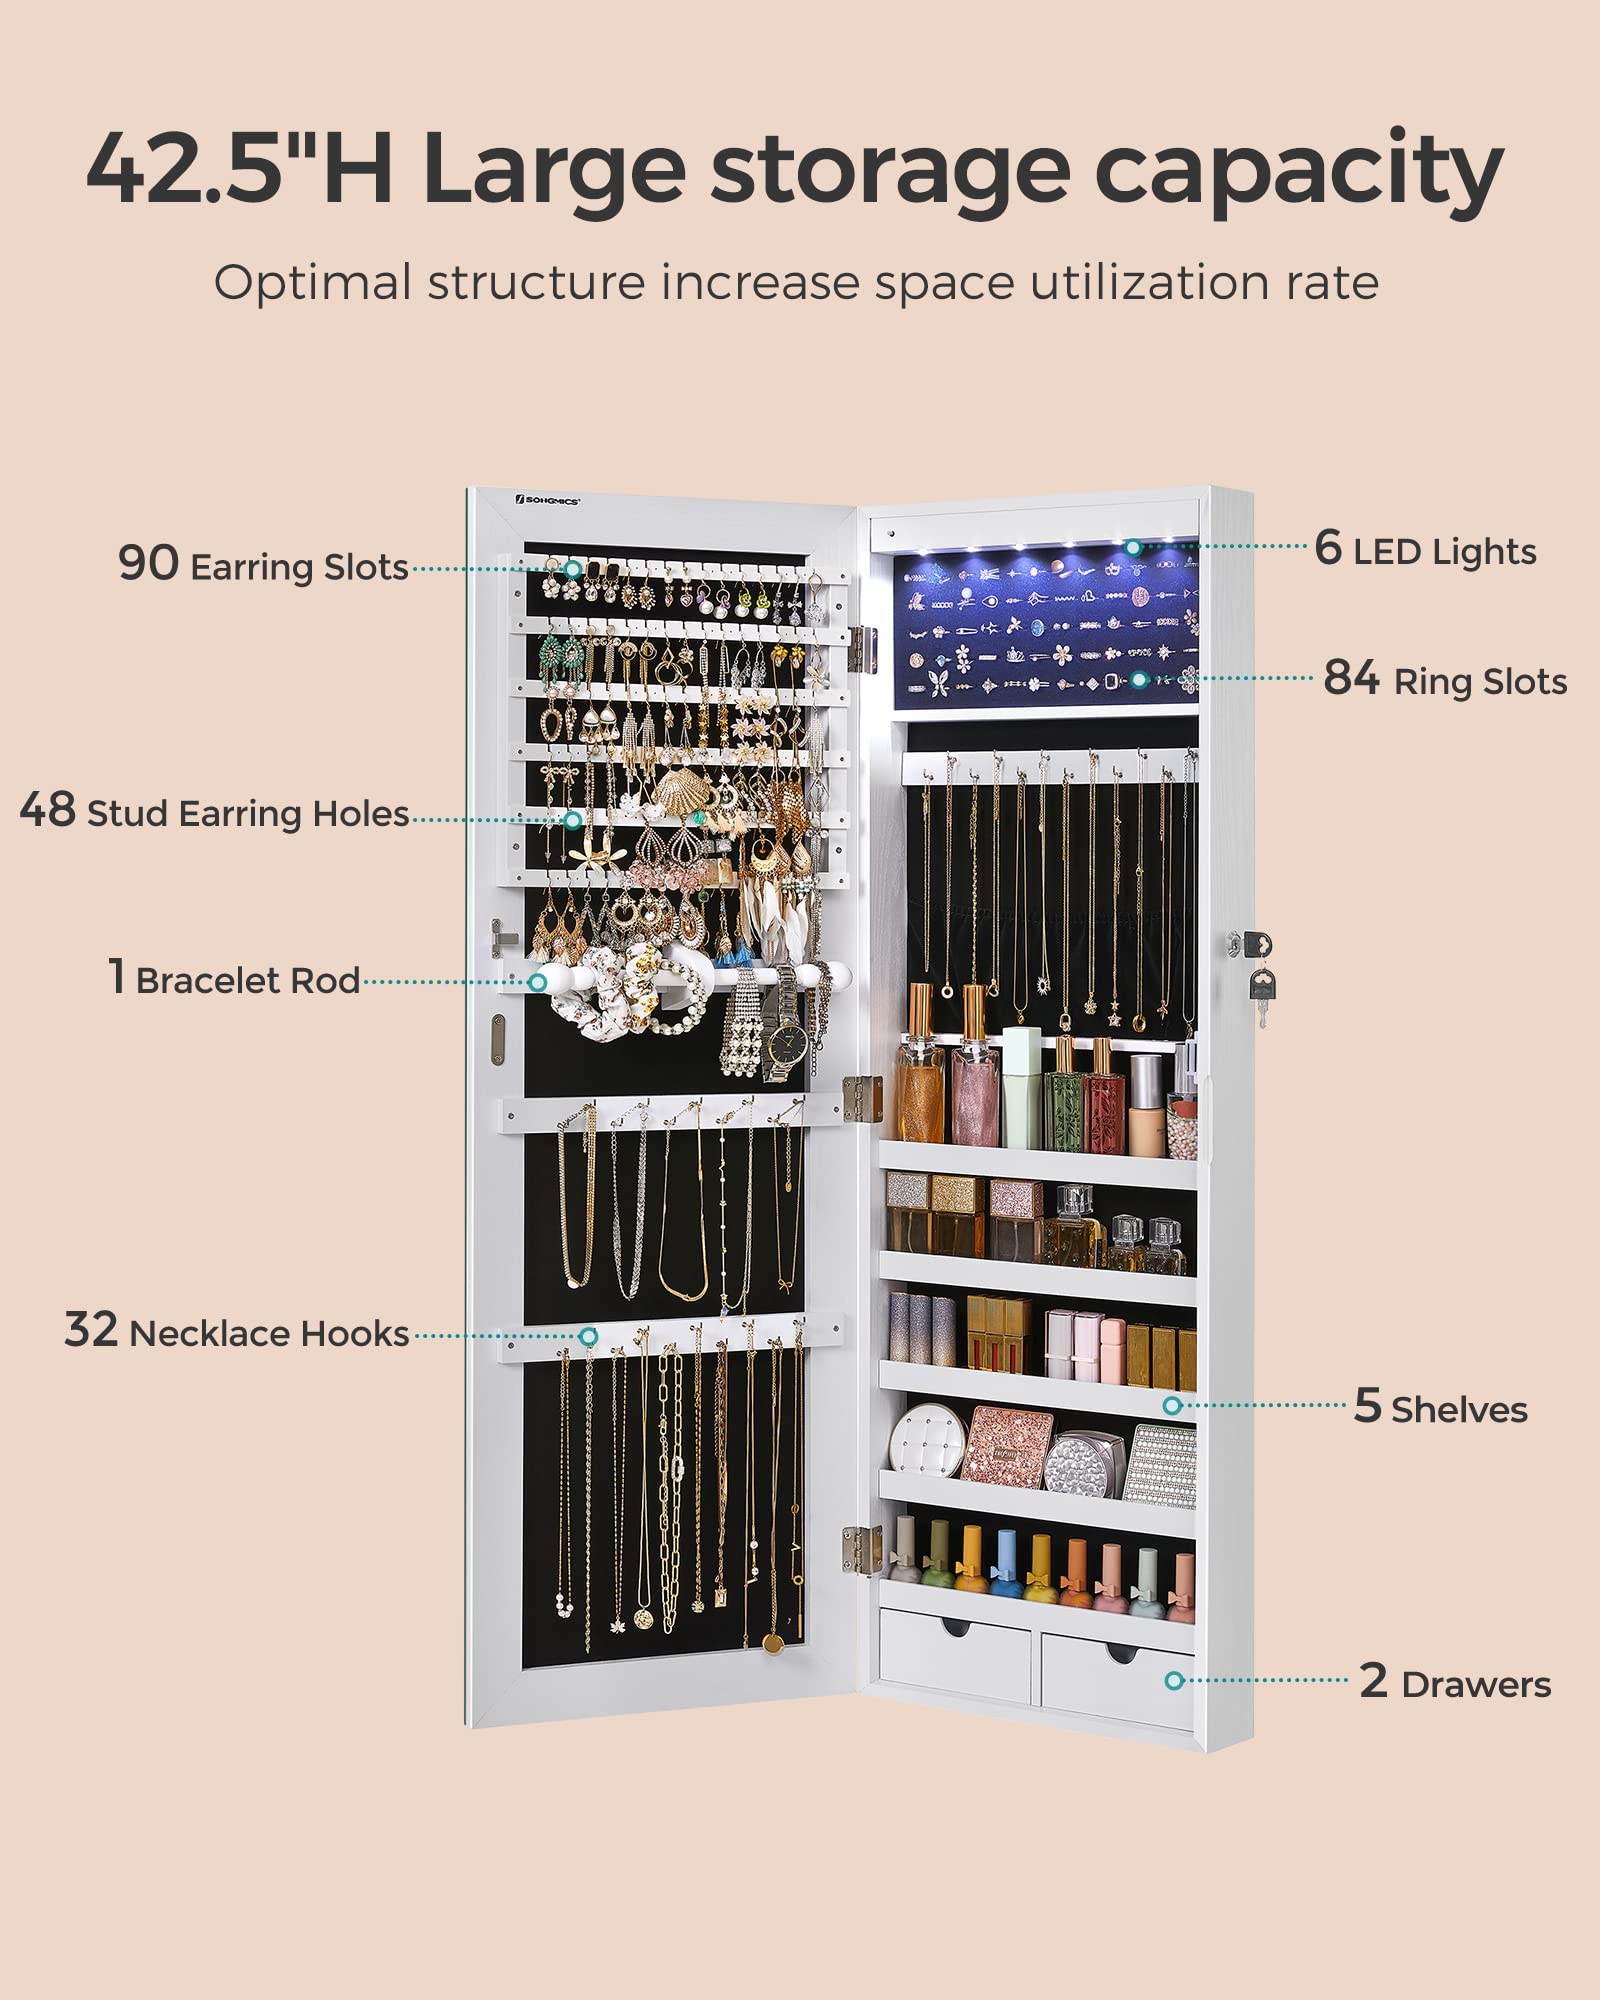 SONGMICS Hanging Jewelry Cabinet, Wall-Mounted with LED Interior Lights, Door-Mounted Jewelry Organizer, Full-Length Mirror, Gift Idea, White UJJC99WT